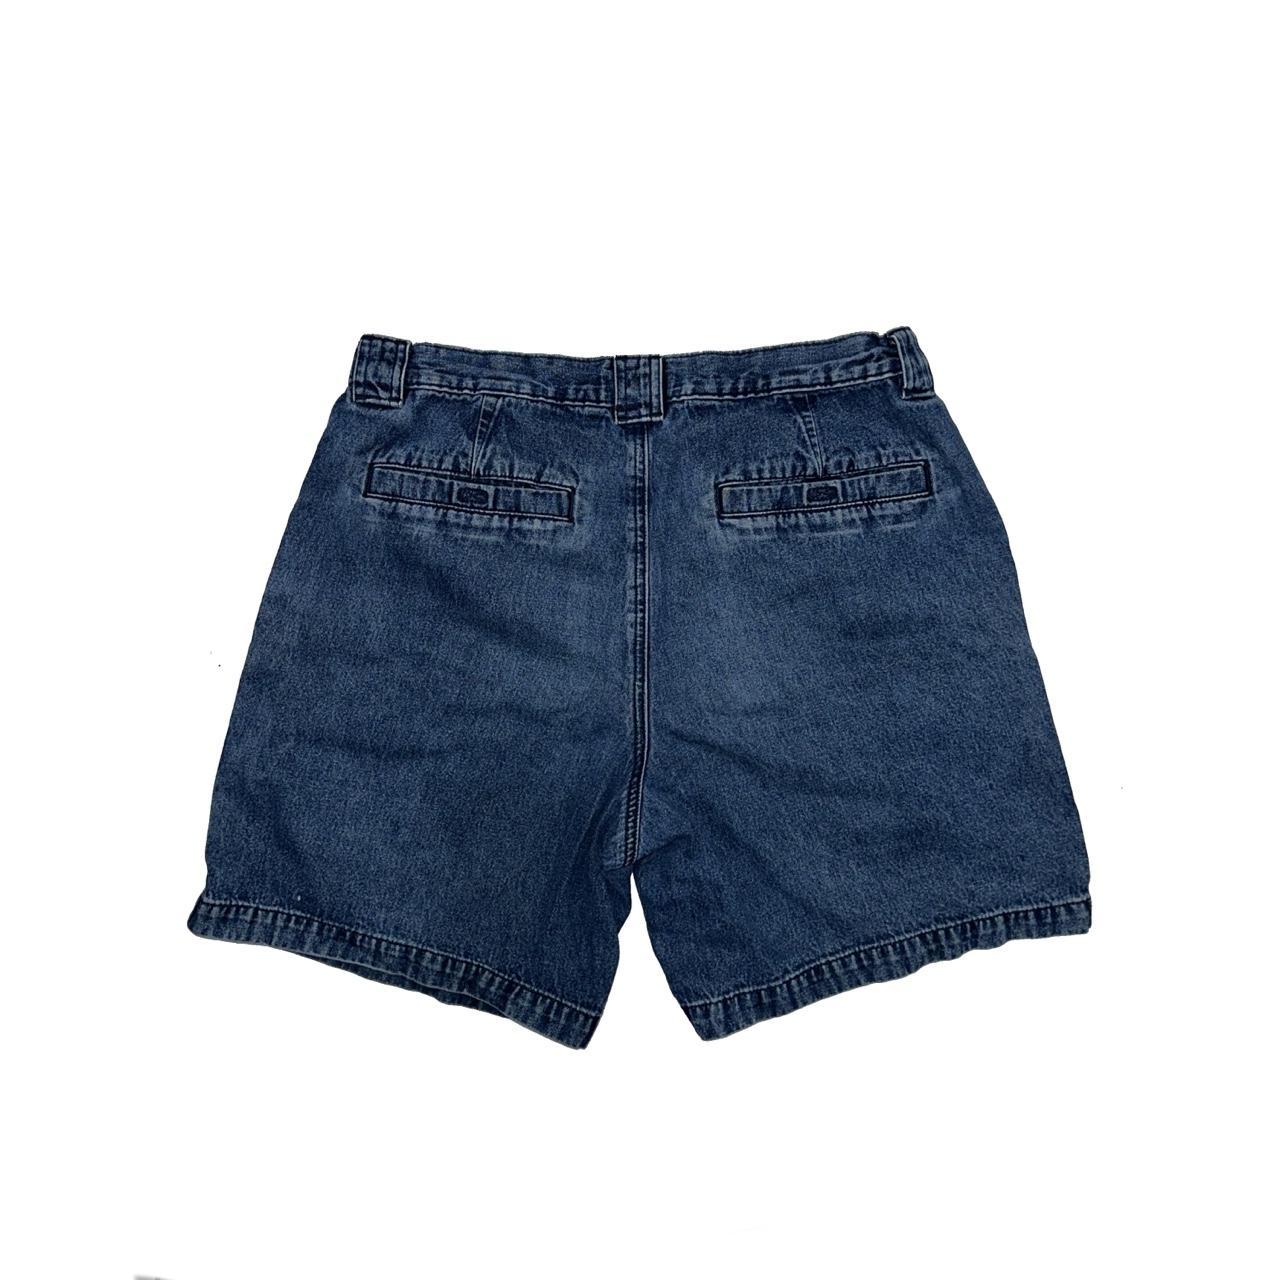 These #jorts are the perfect #denim #shorts for any... - Depop